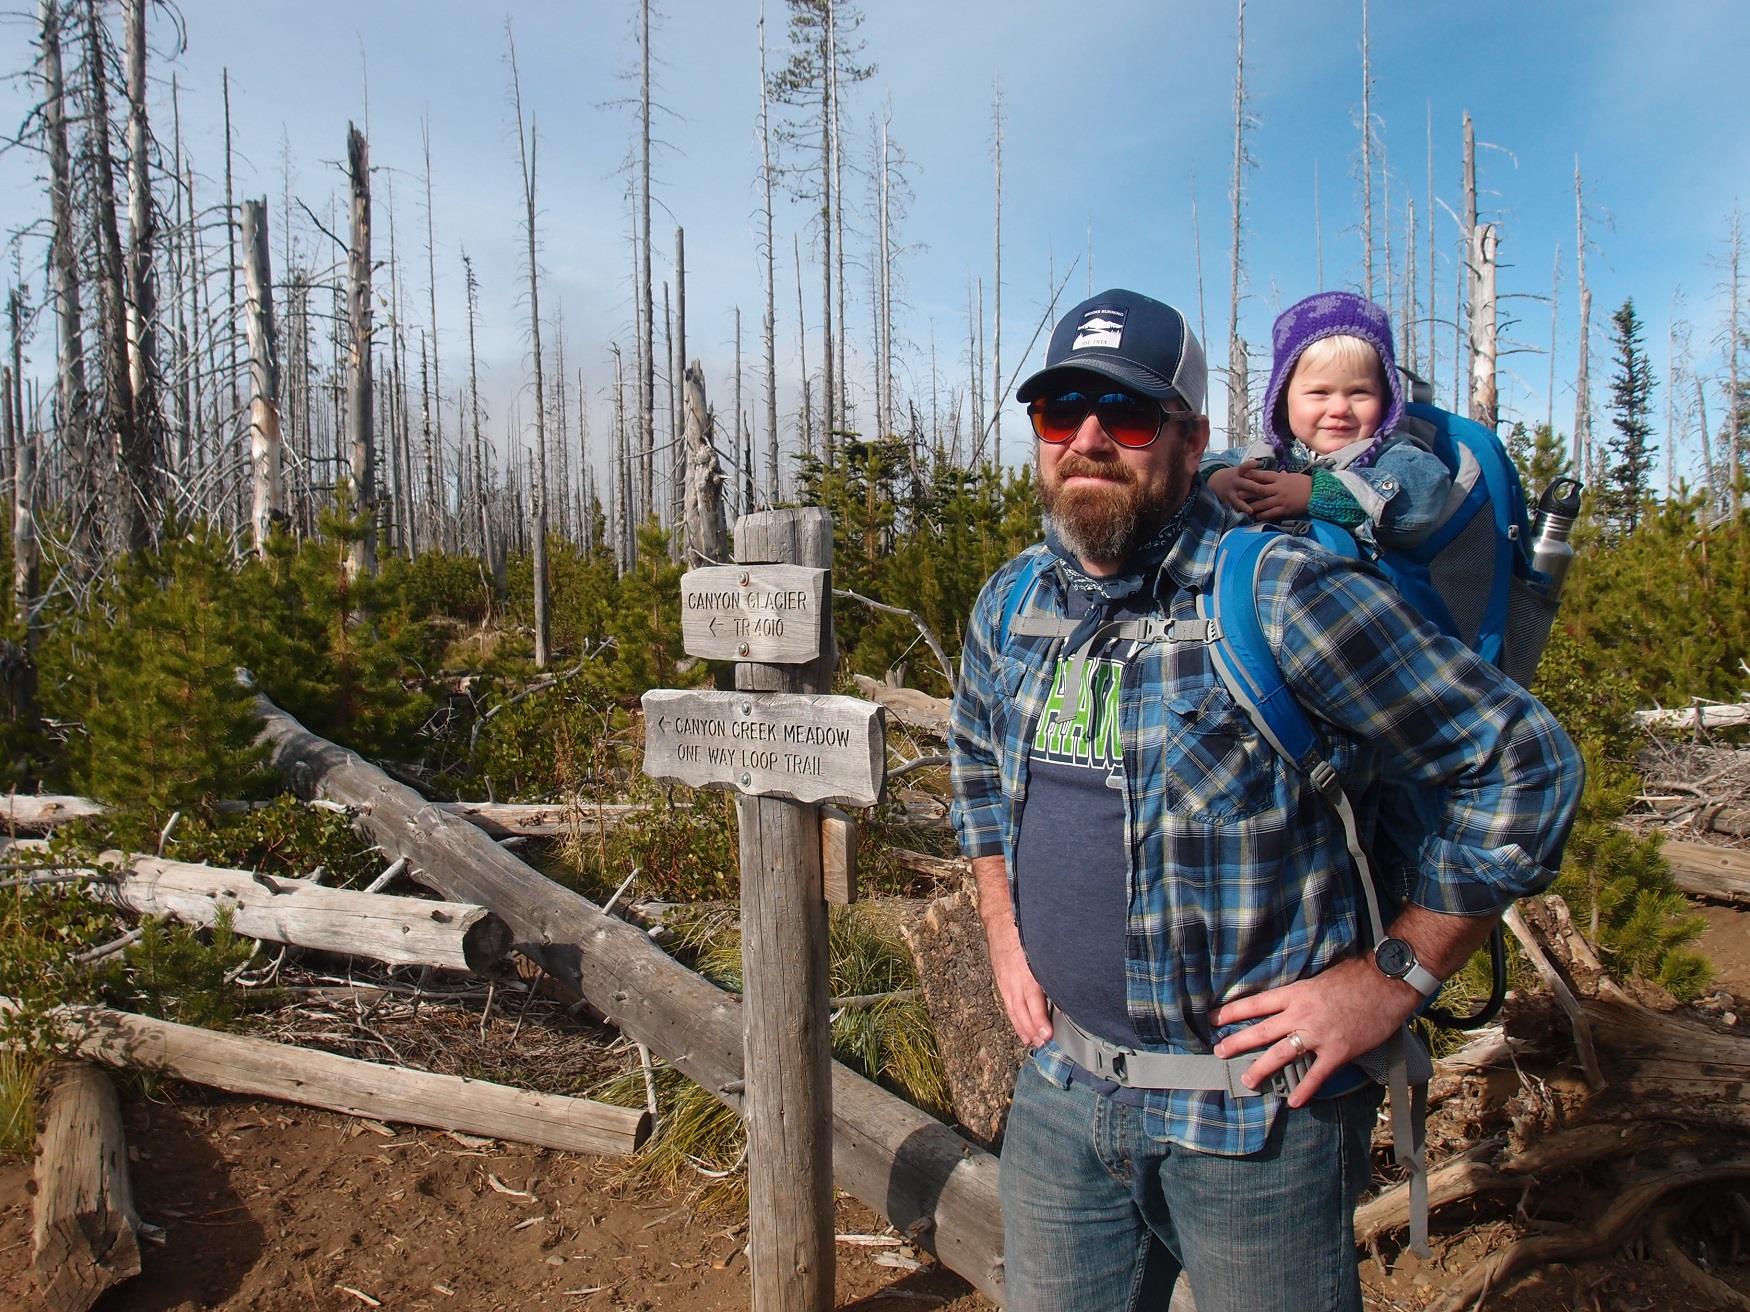 This is a father and daughter at the trailhead of the Canyon Creek Meadow Hike near Cold Springs Resort in Camp Sherman, Oregon